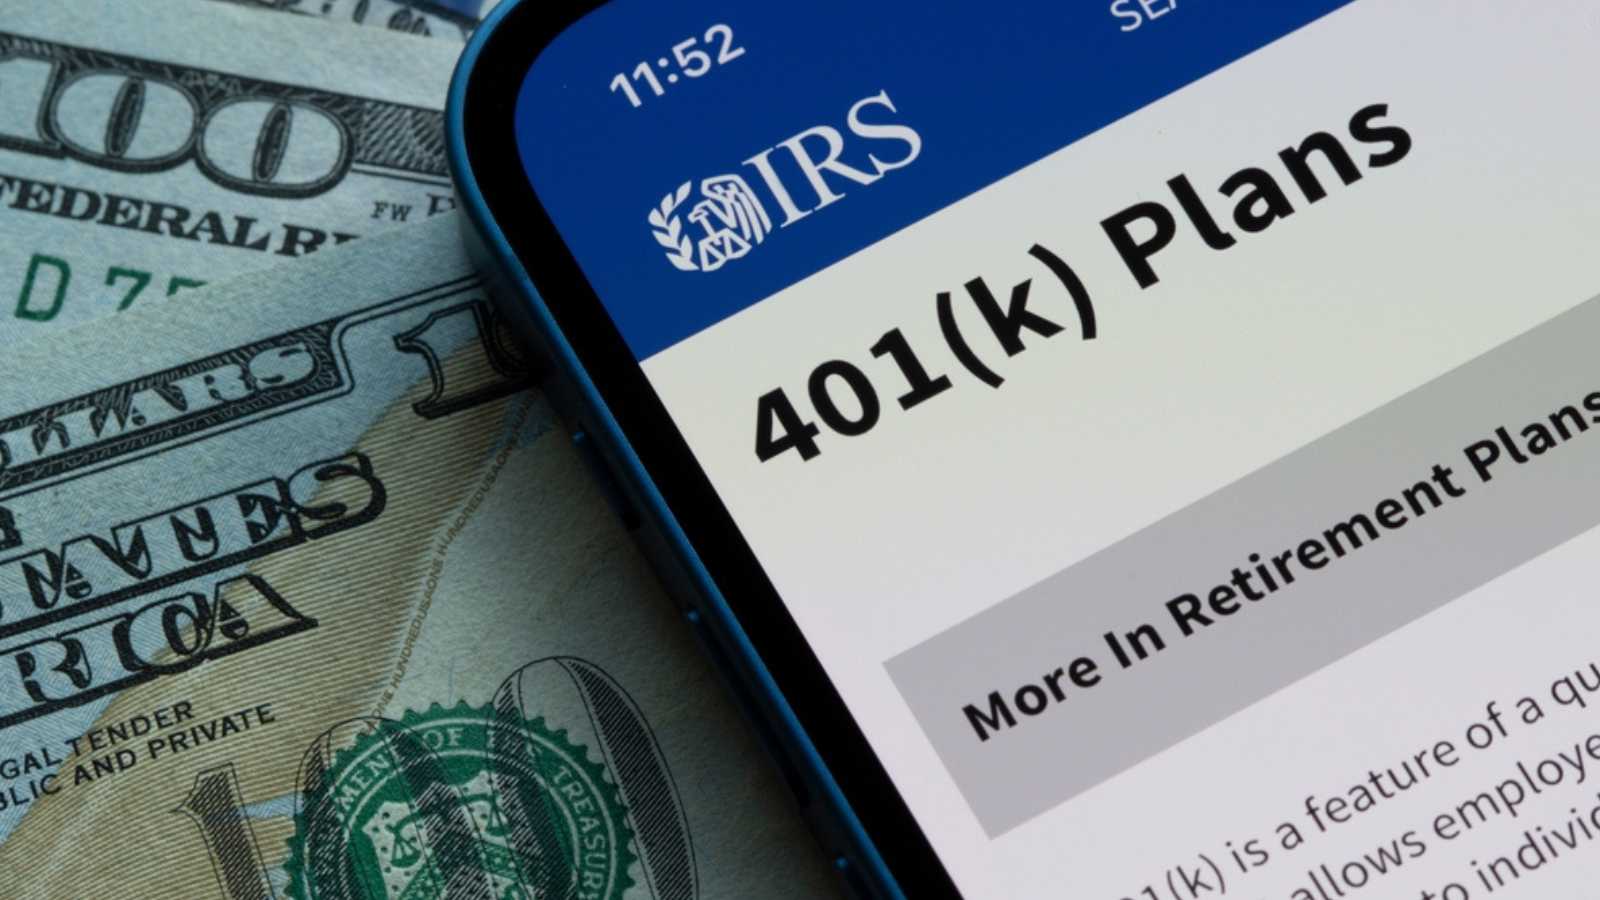 Portland, OR, USA - Dec 3, 2021: The 401(K) Plans page on the IRS website is seen on an iPhone. 401(k) plans are employer-sponsored defined-contribution pension accounts.